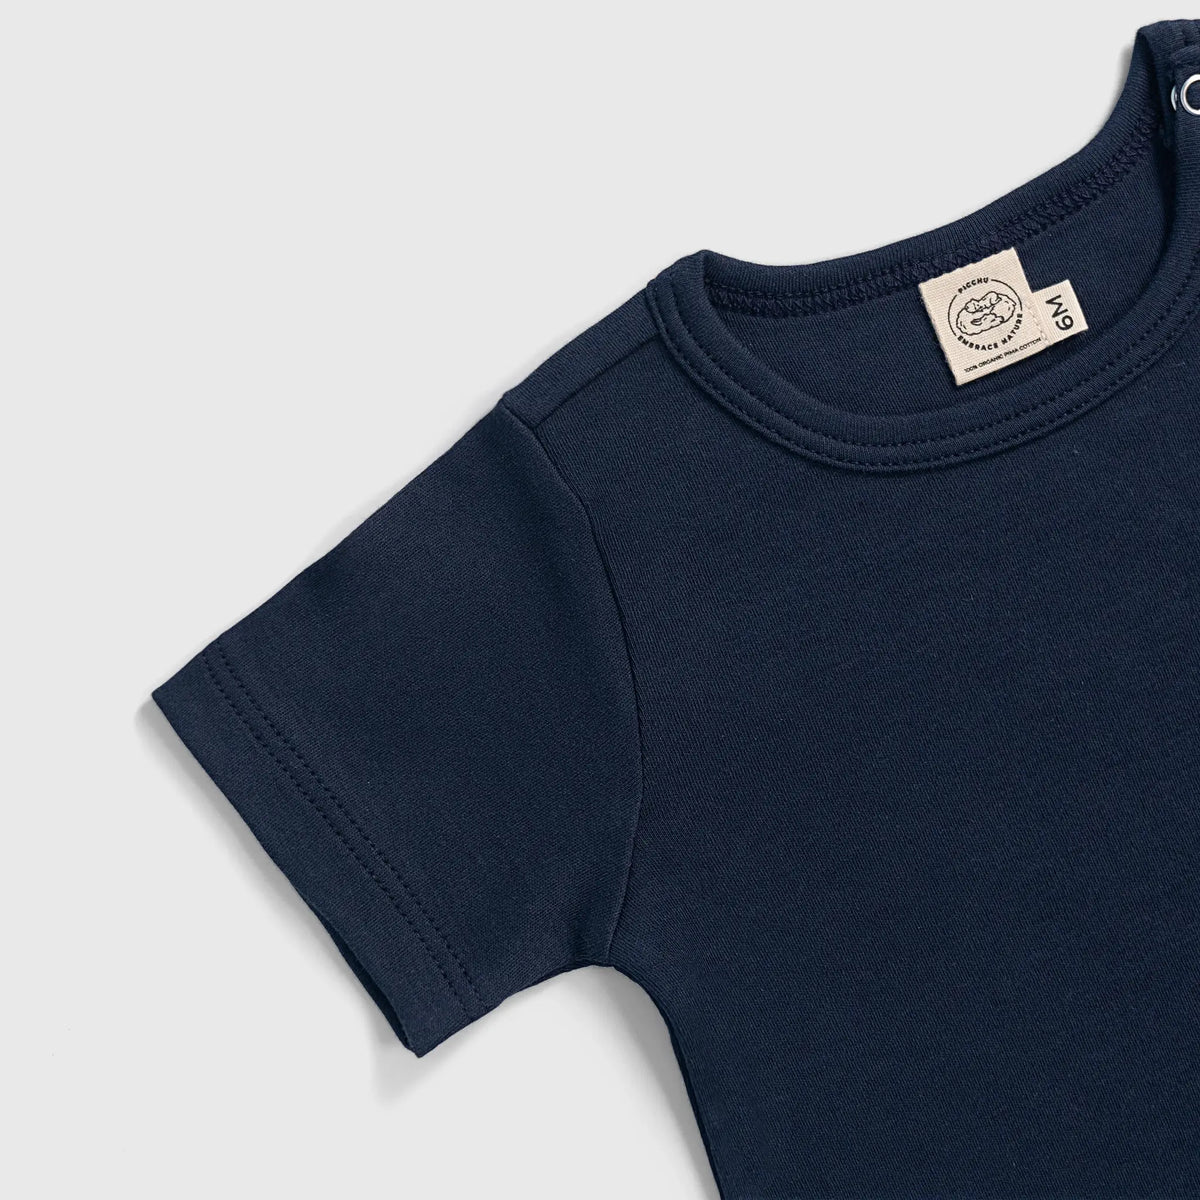 babys miscroplastic free tee color navy blue